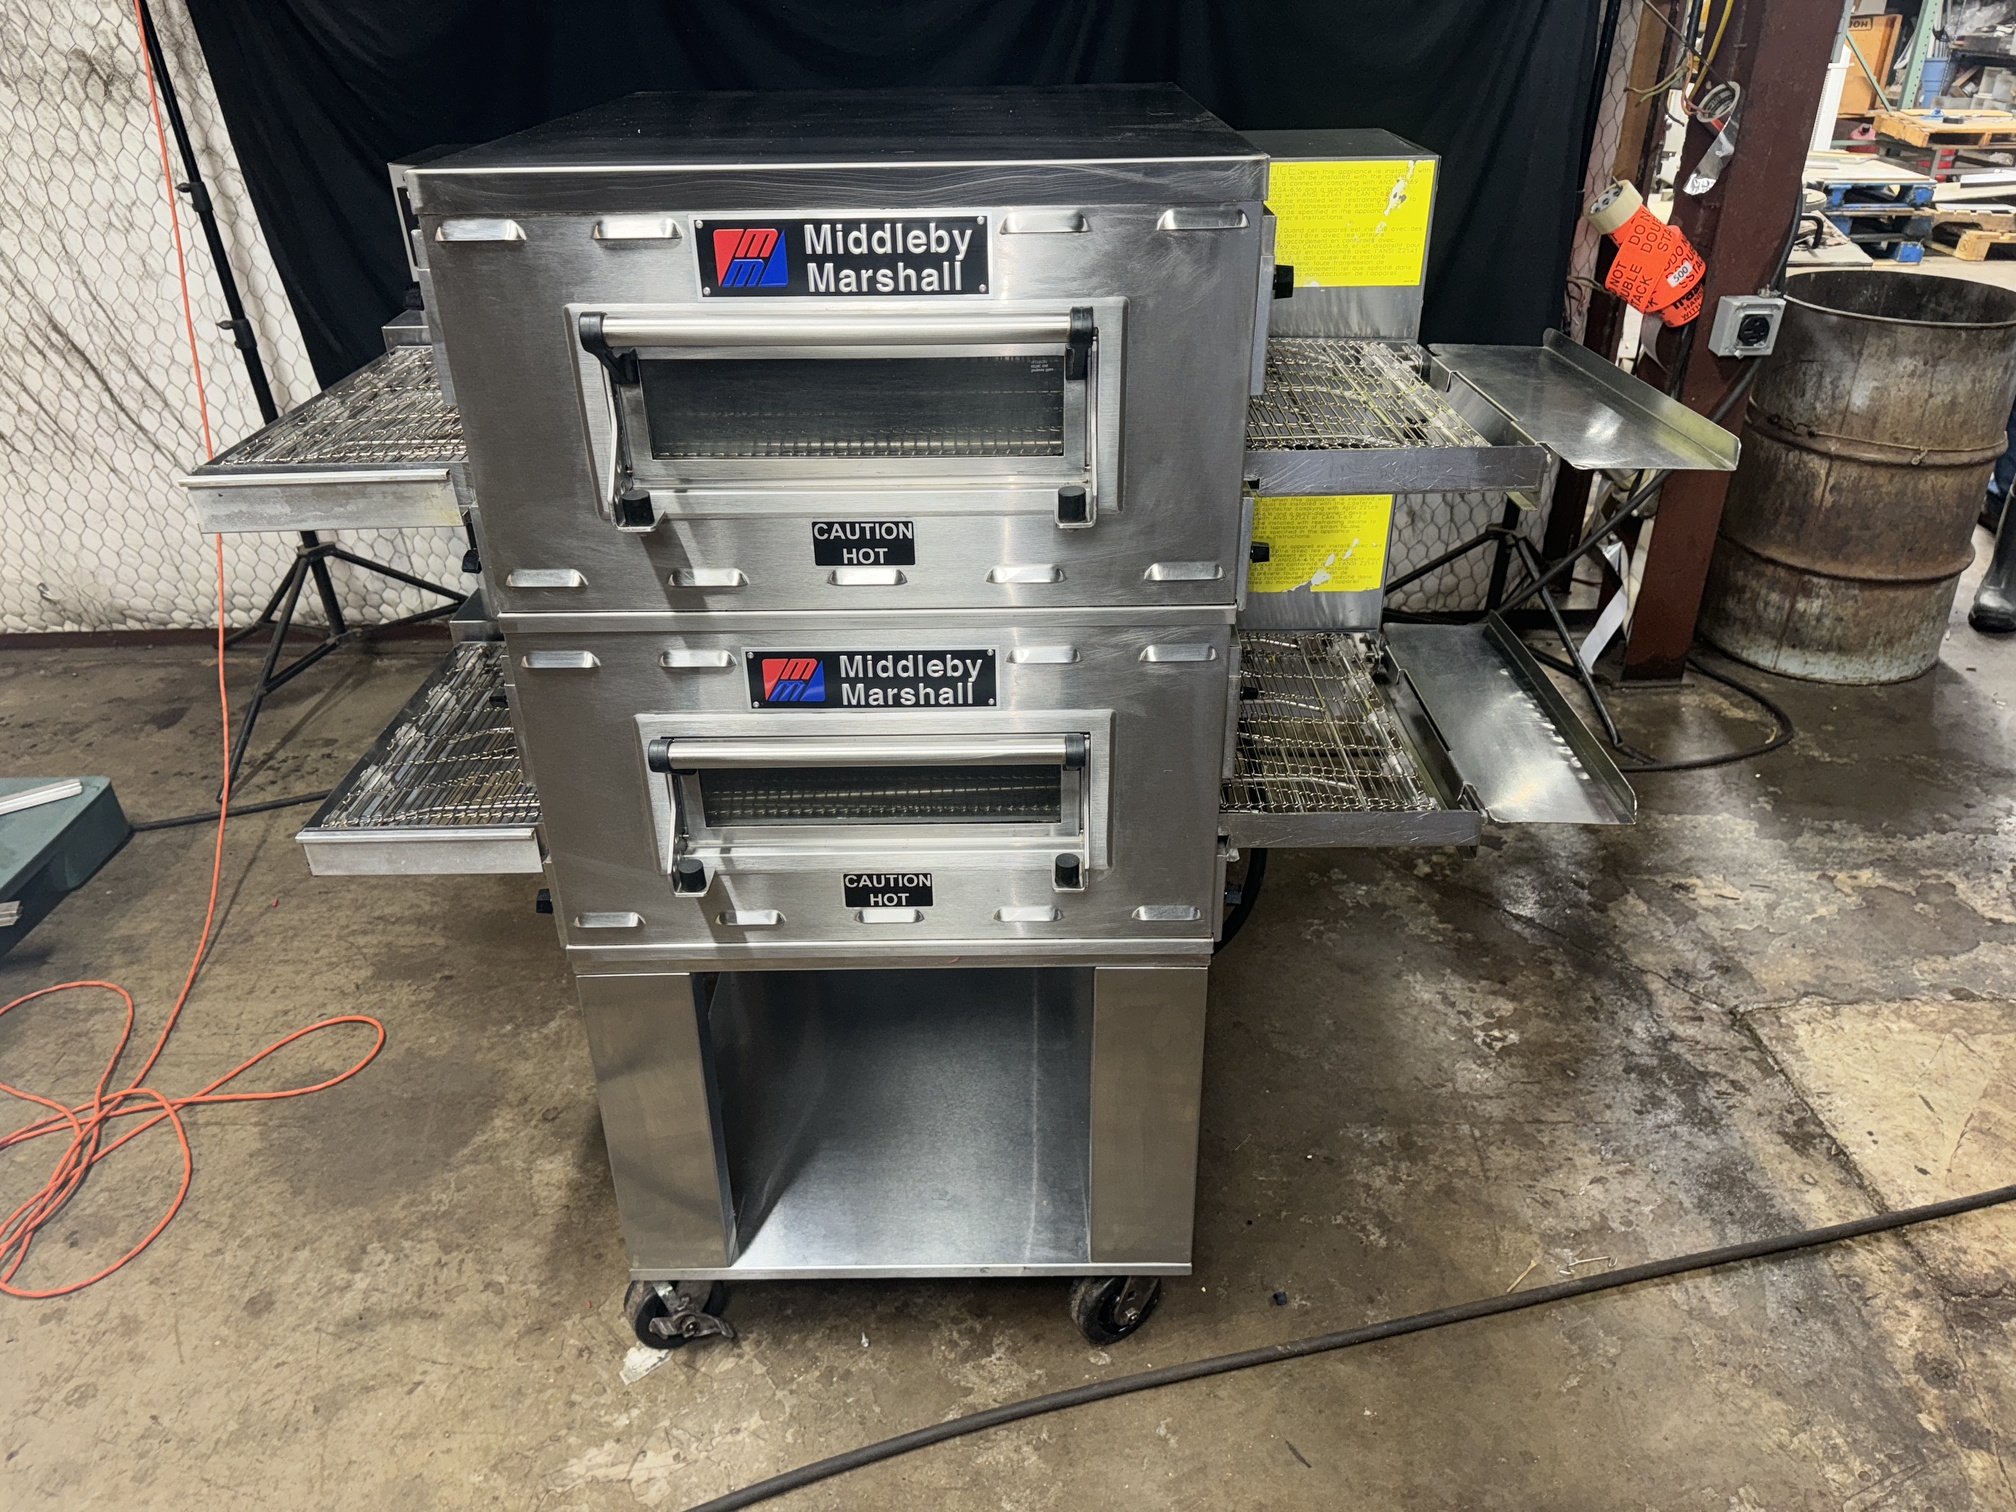 Middleby Marshall PS629e WoW! Electric Double Stack Conveyor Pizza Ovens